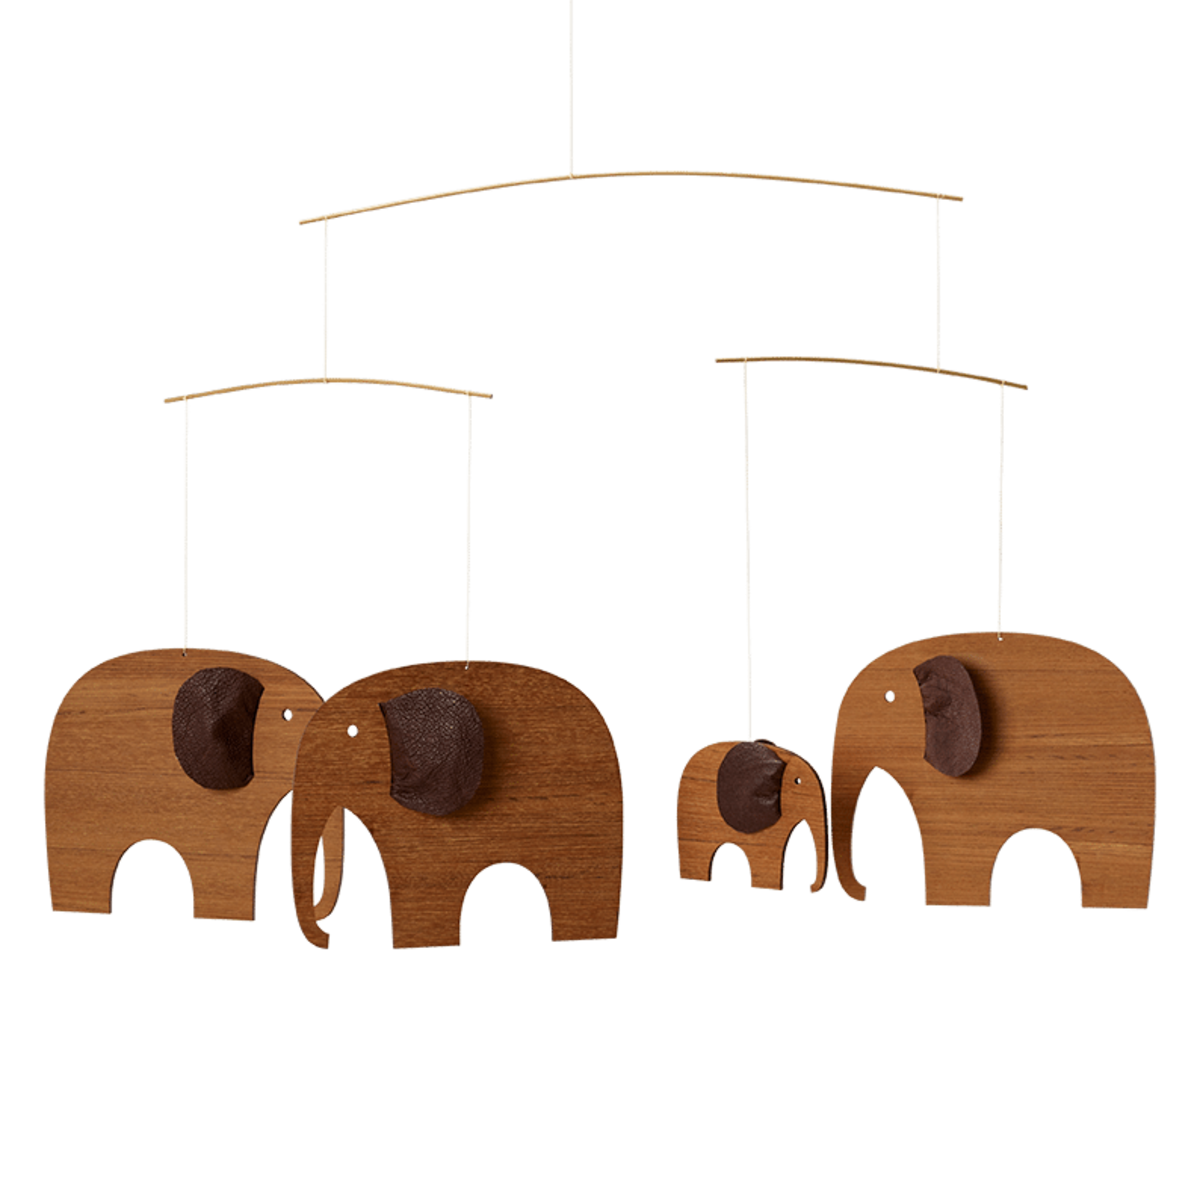 The Elephant Party mobile